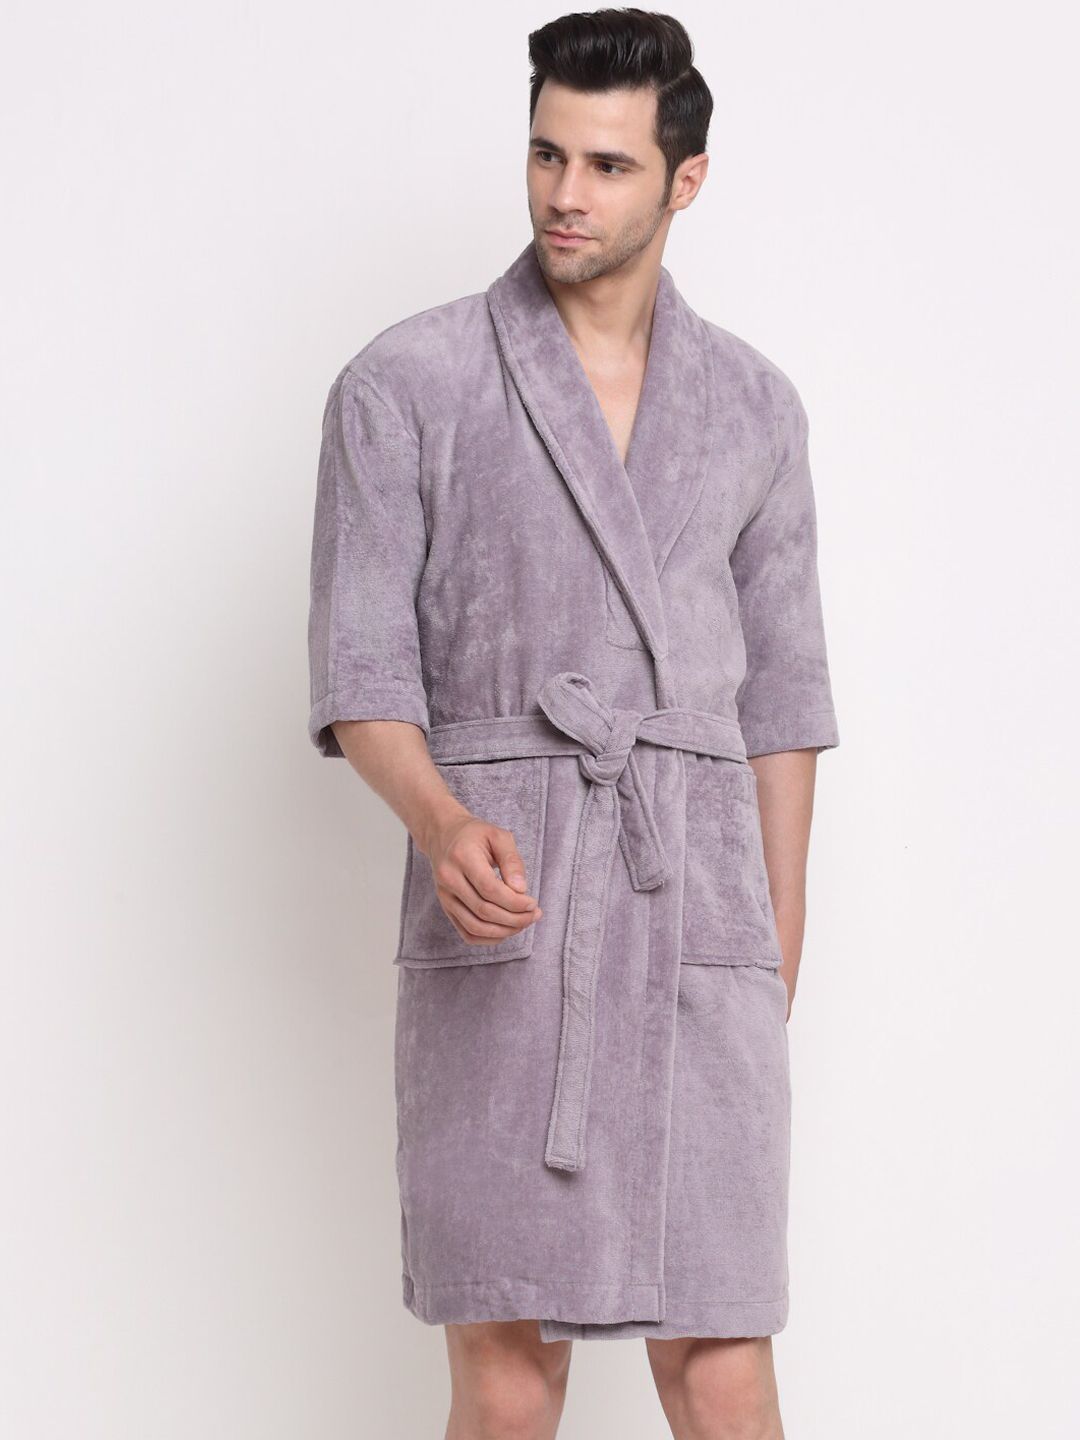 Trident Purple Solid Bath Robe With Belt Price in India